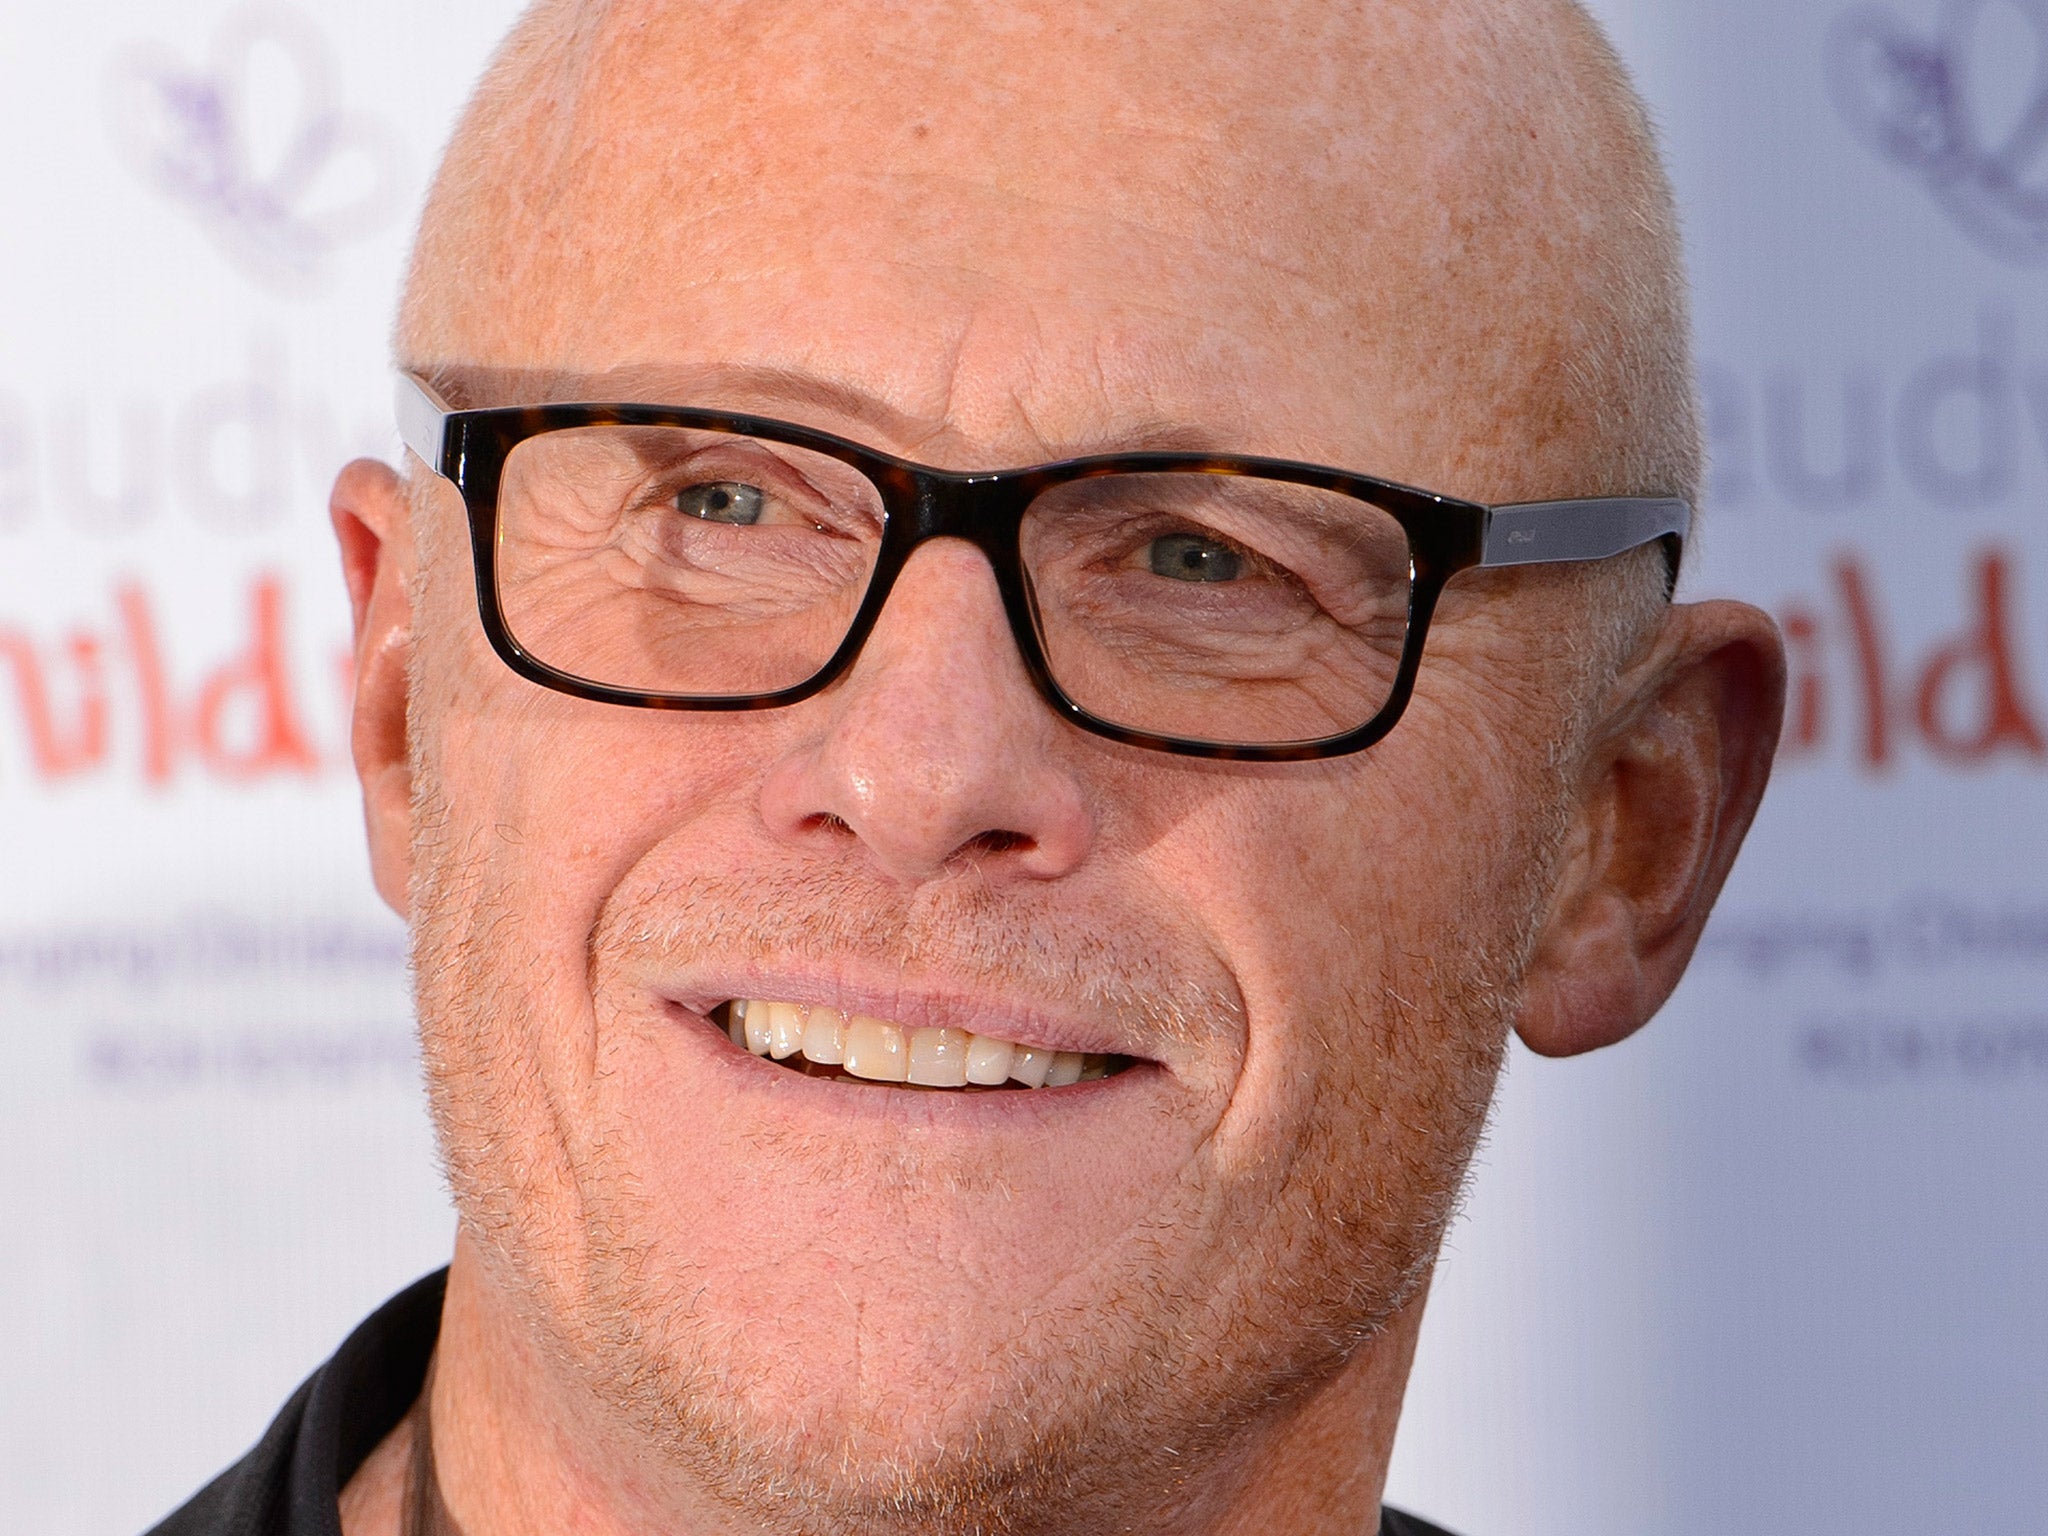 John Caudwell, the billionaire founder of Phones 4U, says he was ‘beyond shocked’ at the PM’s reversal on green reforms